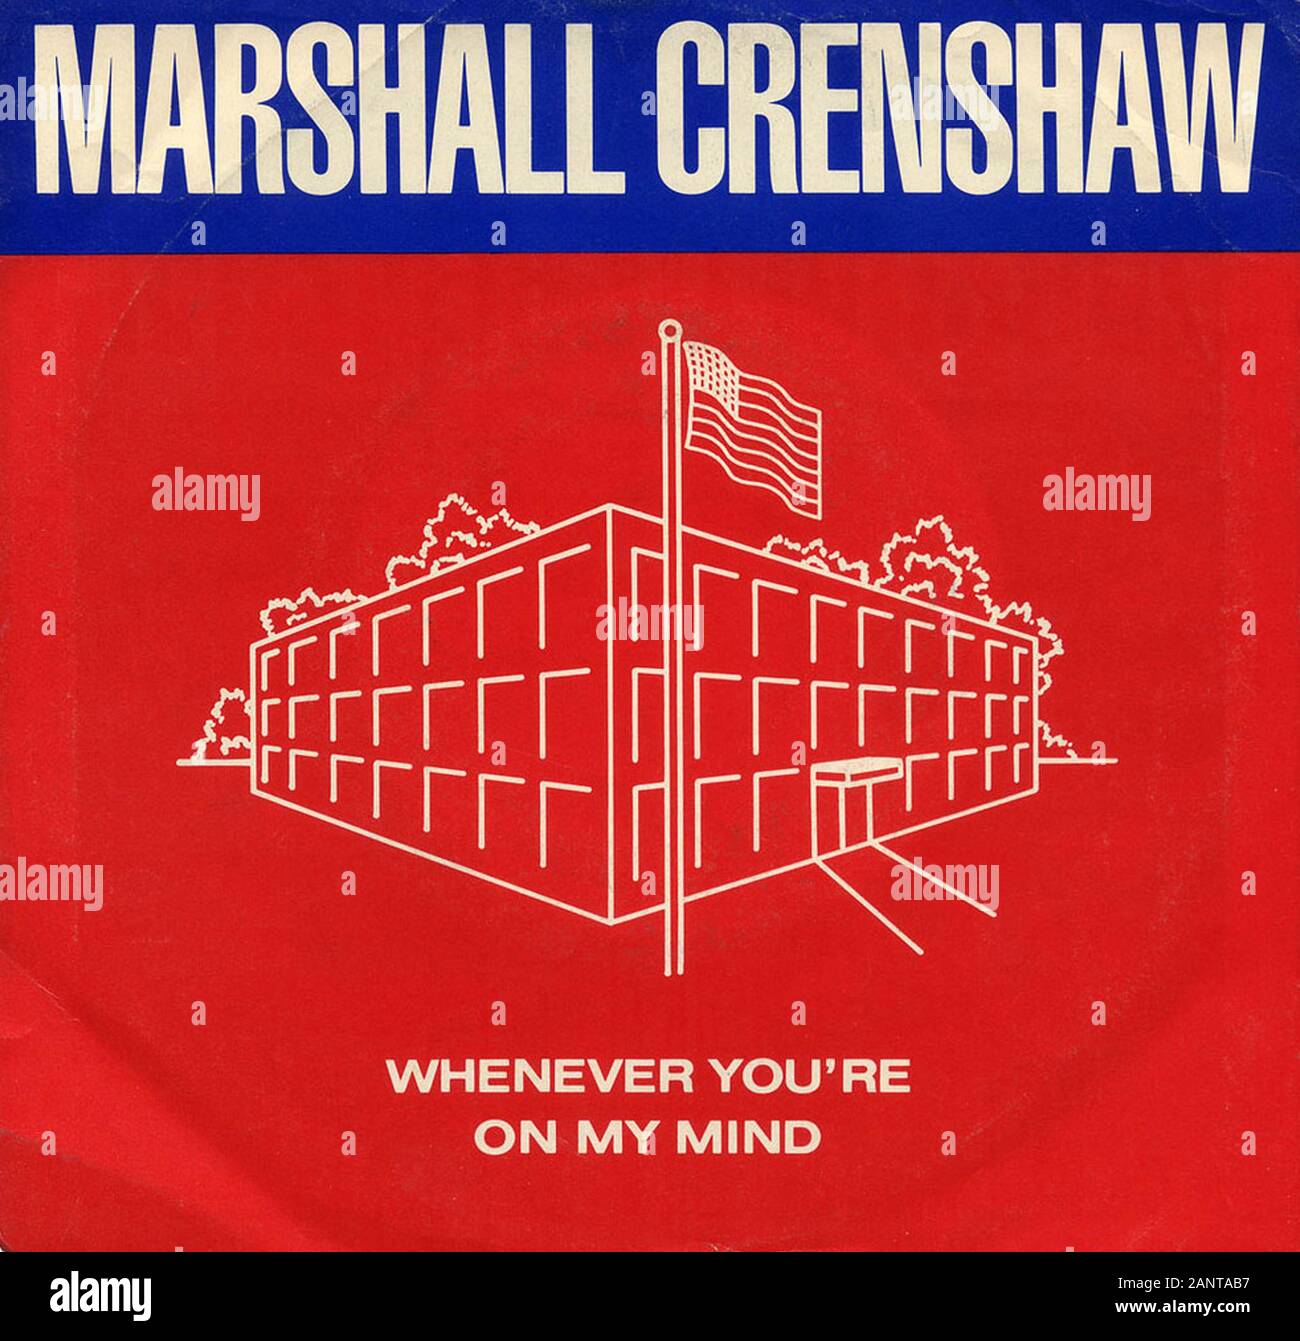 Marshall Crenshaw - Whenever You’re On My Mind - Classic vintage vinyl album Stock Photo